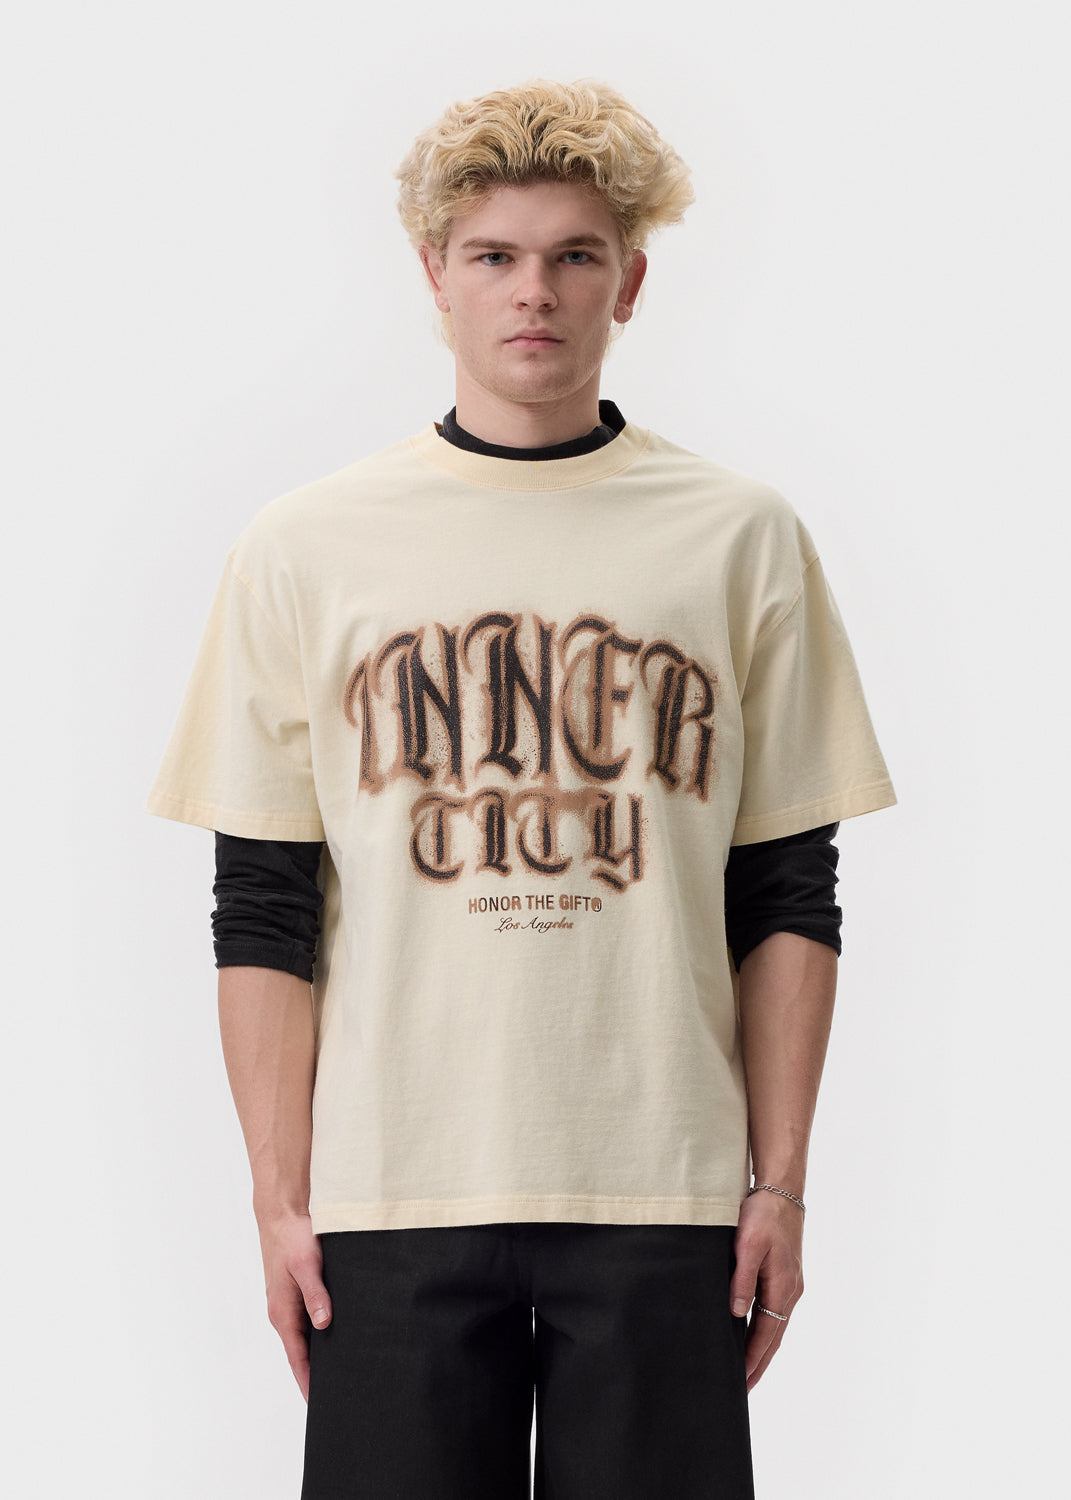 Honor the Gift - White Stamp Inner City T-Shirt | 1032 SPACE